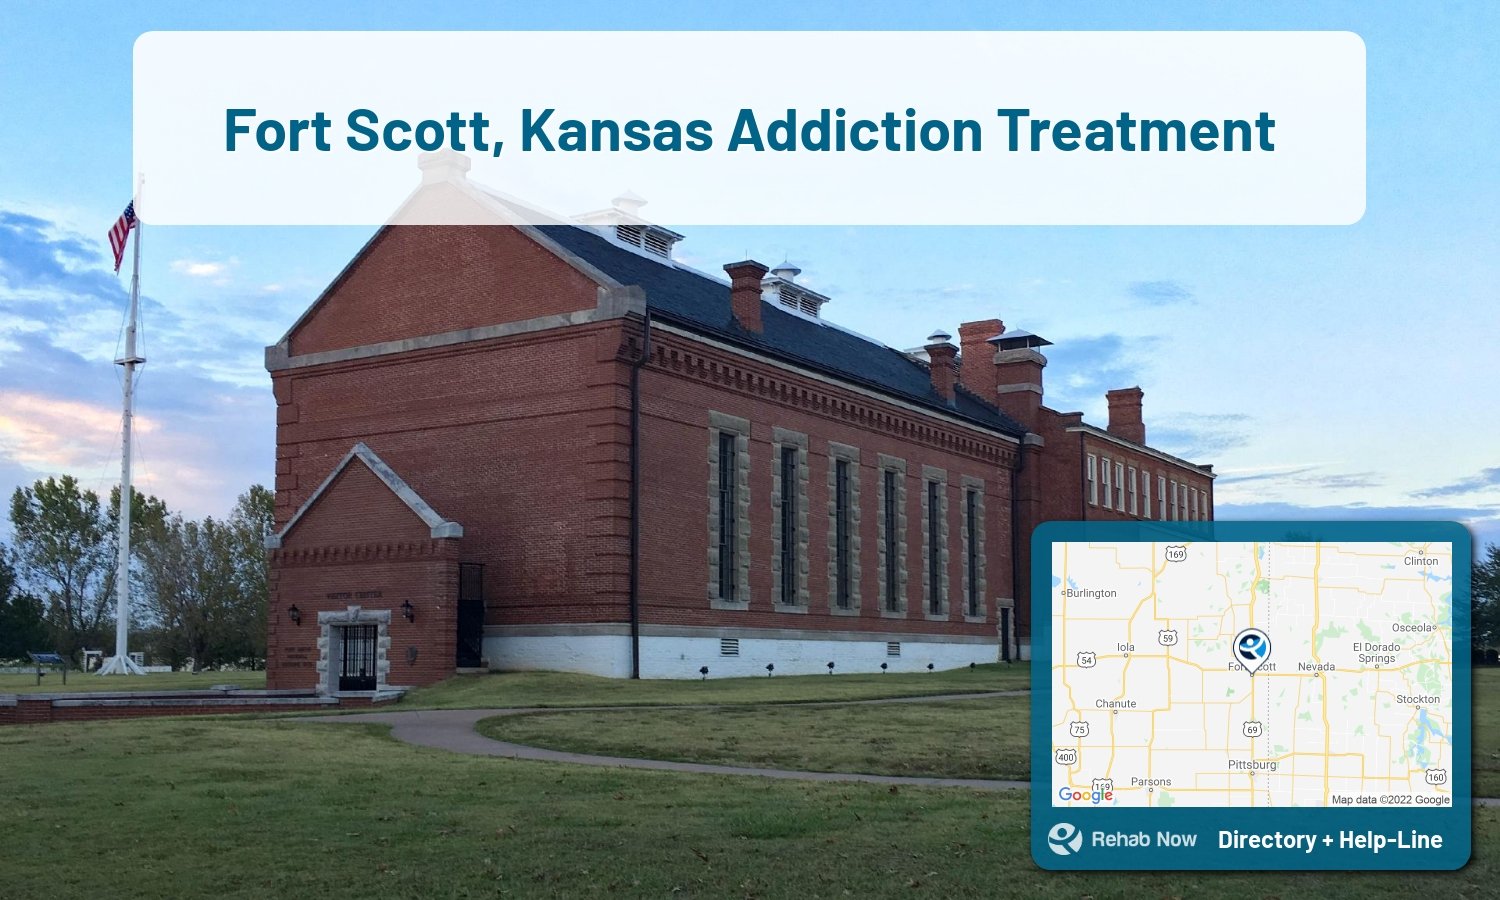 Fort Scott, KS Treatment Centers. Find drug rehab in Fort Scott, Kansas, or detox and treatment programs. Get the right help now!